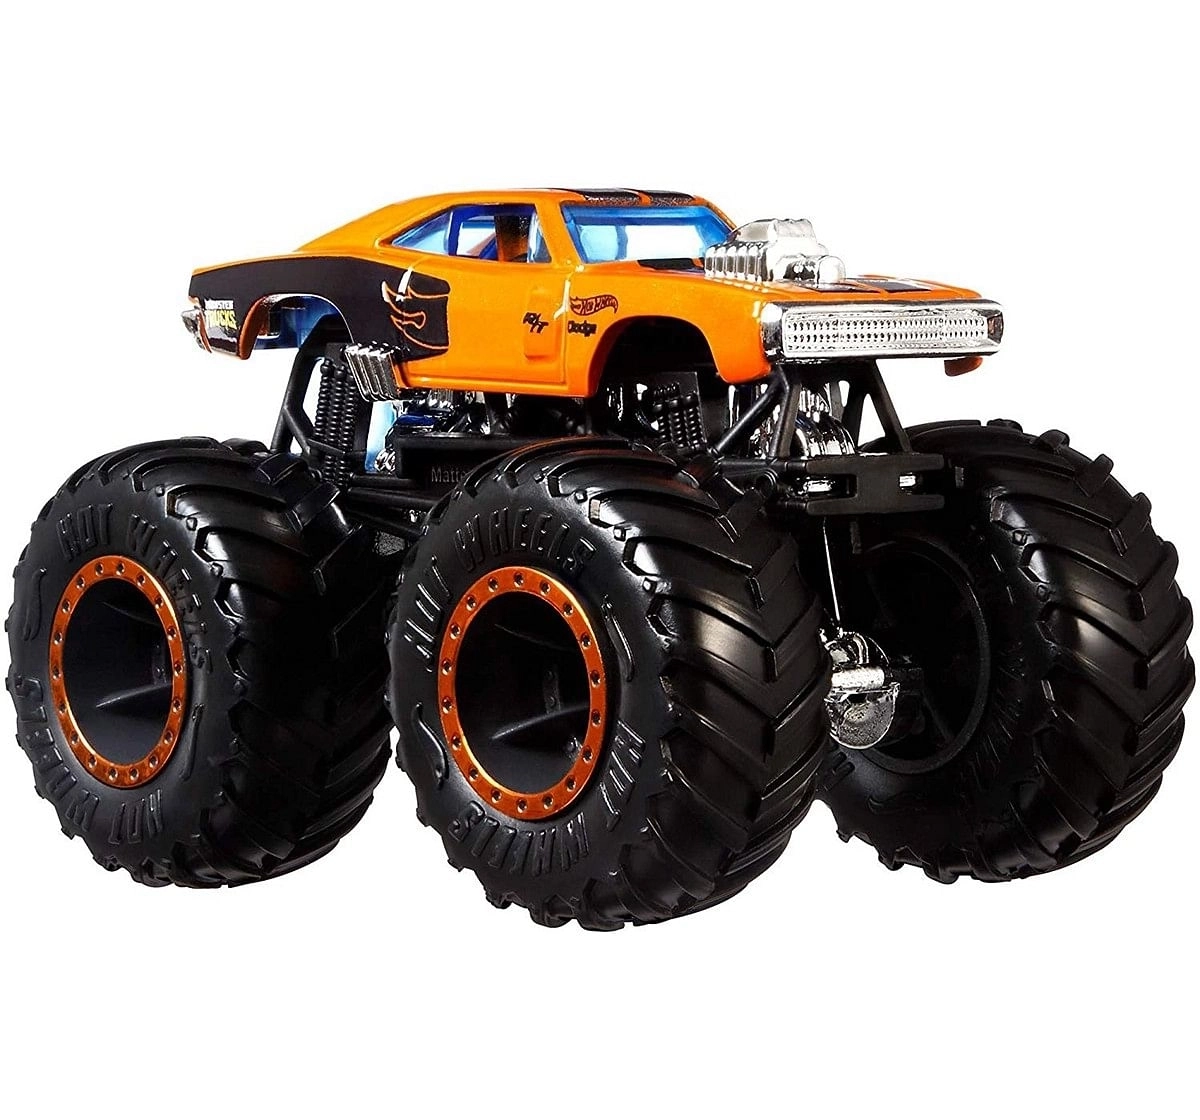 Hot Wheels 1:64 Monster Trucks Demolition Doubles Pack of 2 Vehicles for Kids age 3Y+, Assorted